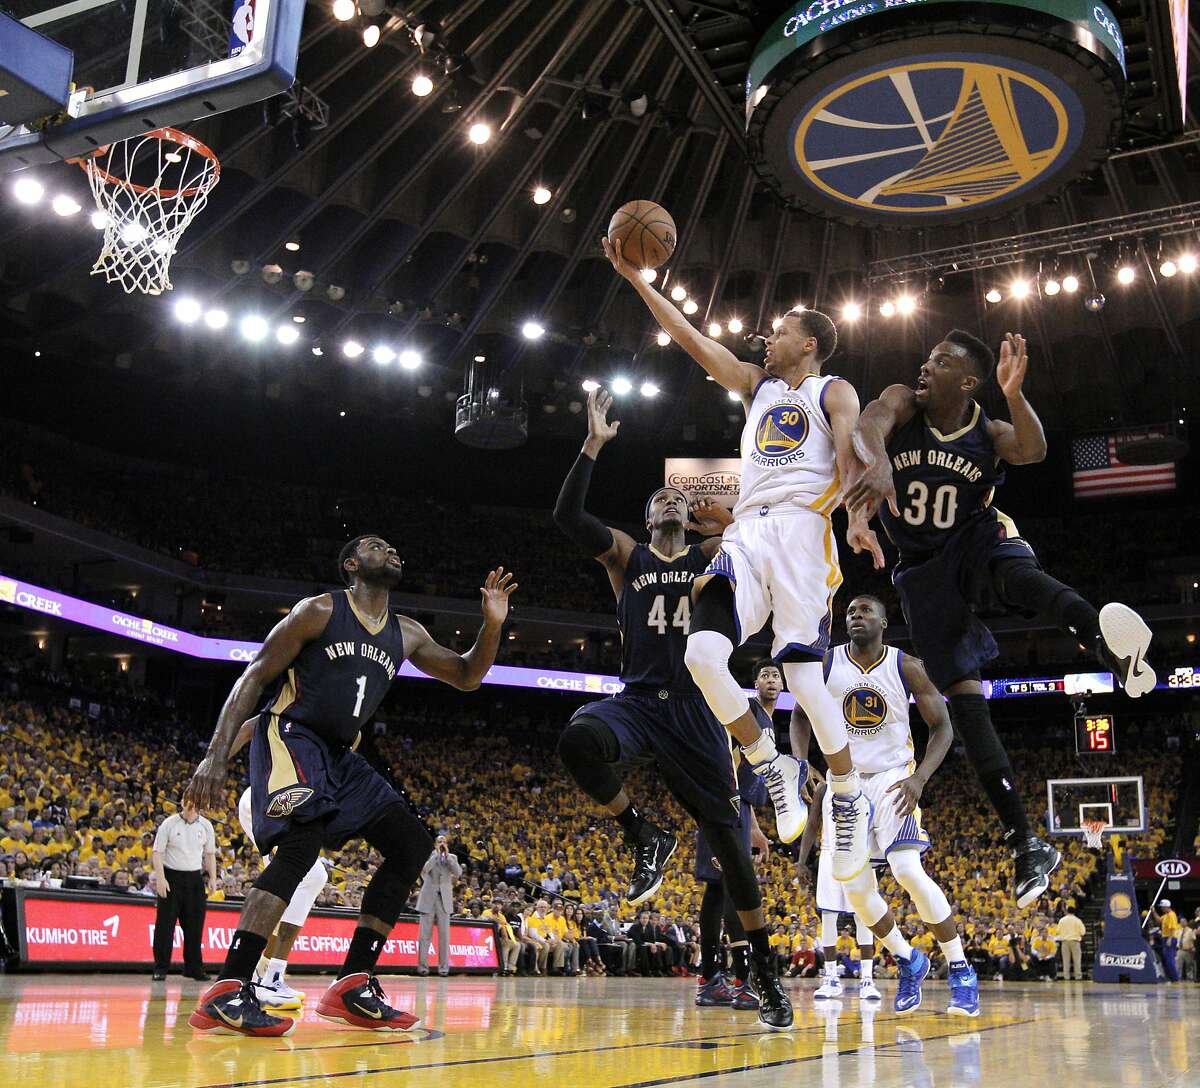 Stephen Curry (30) elevates as he goes to the basket during the second half. The Golden State Warriors played the New Orleans Pelicans in Game 2 of the 1st Round of NBA Western Conference Playoffs at Oracle Arena in Oakland, Calif., on Monday, April 20, 2015.